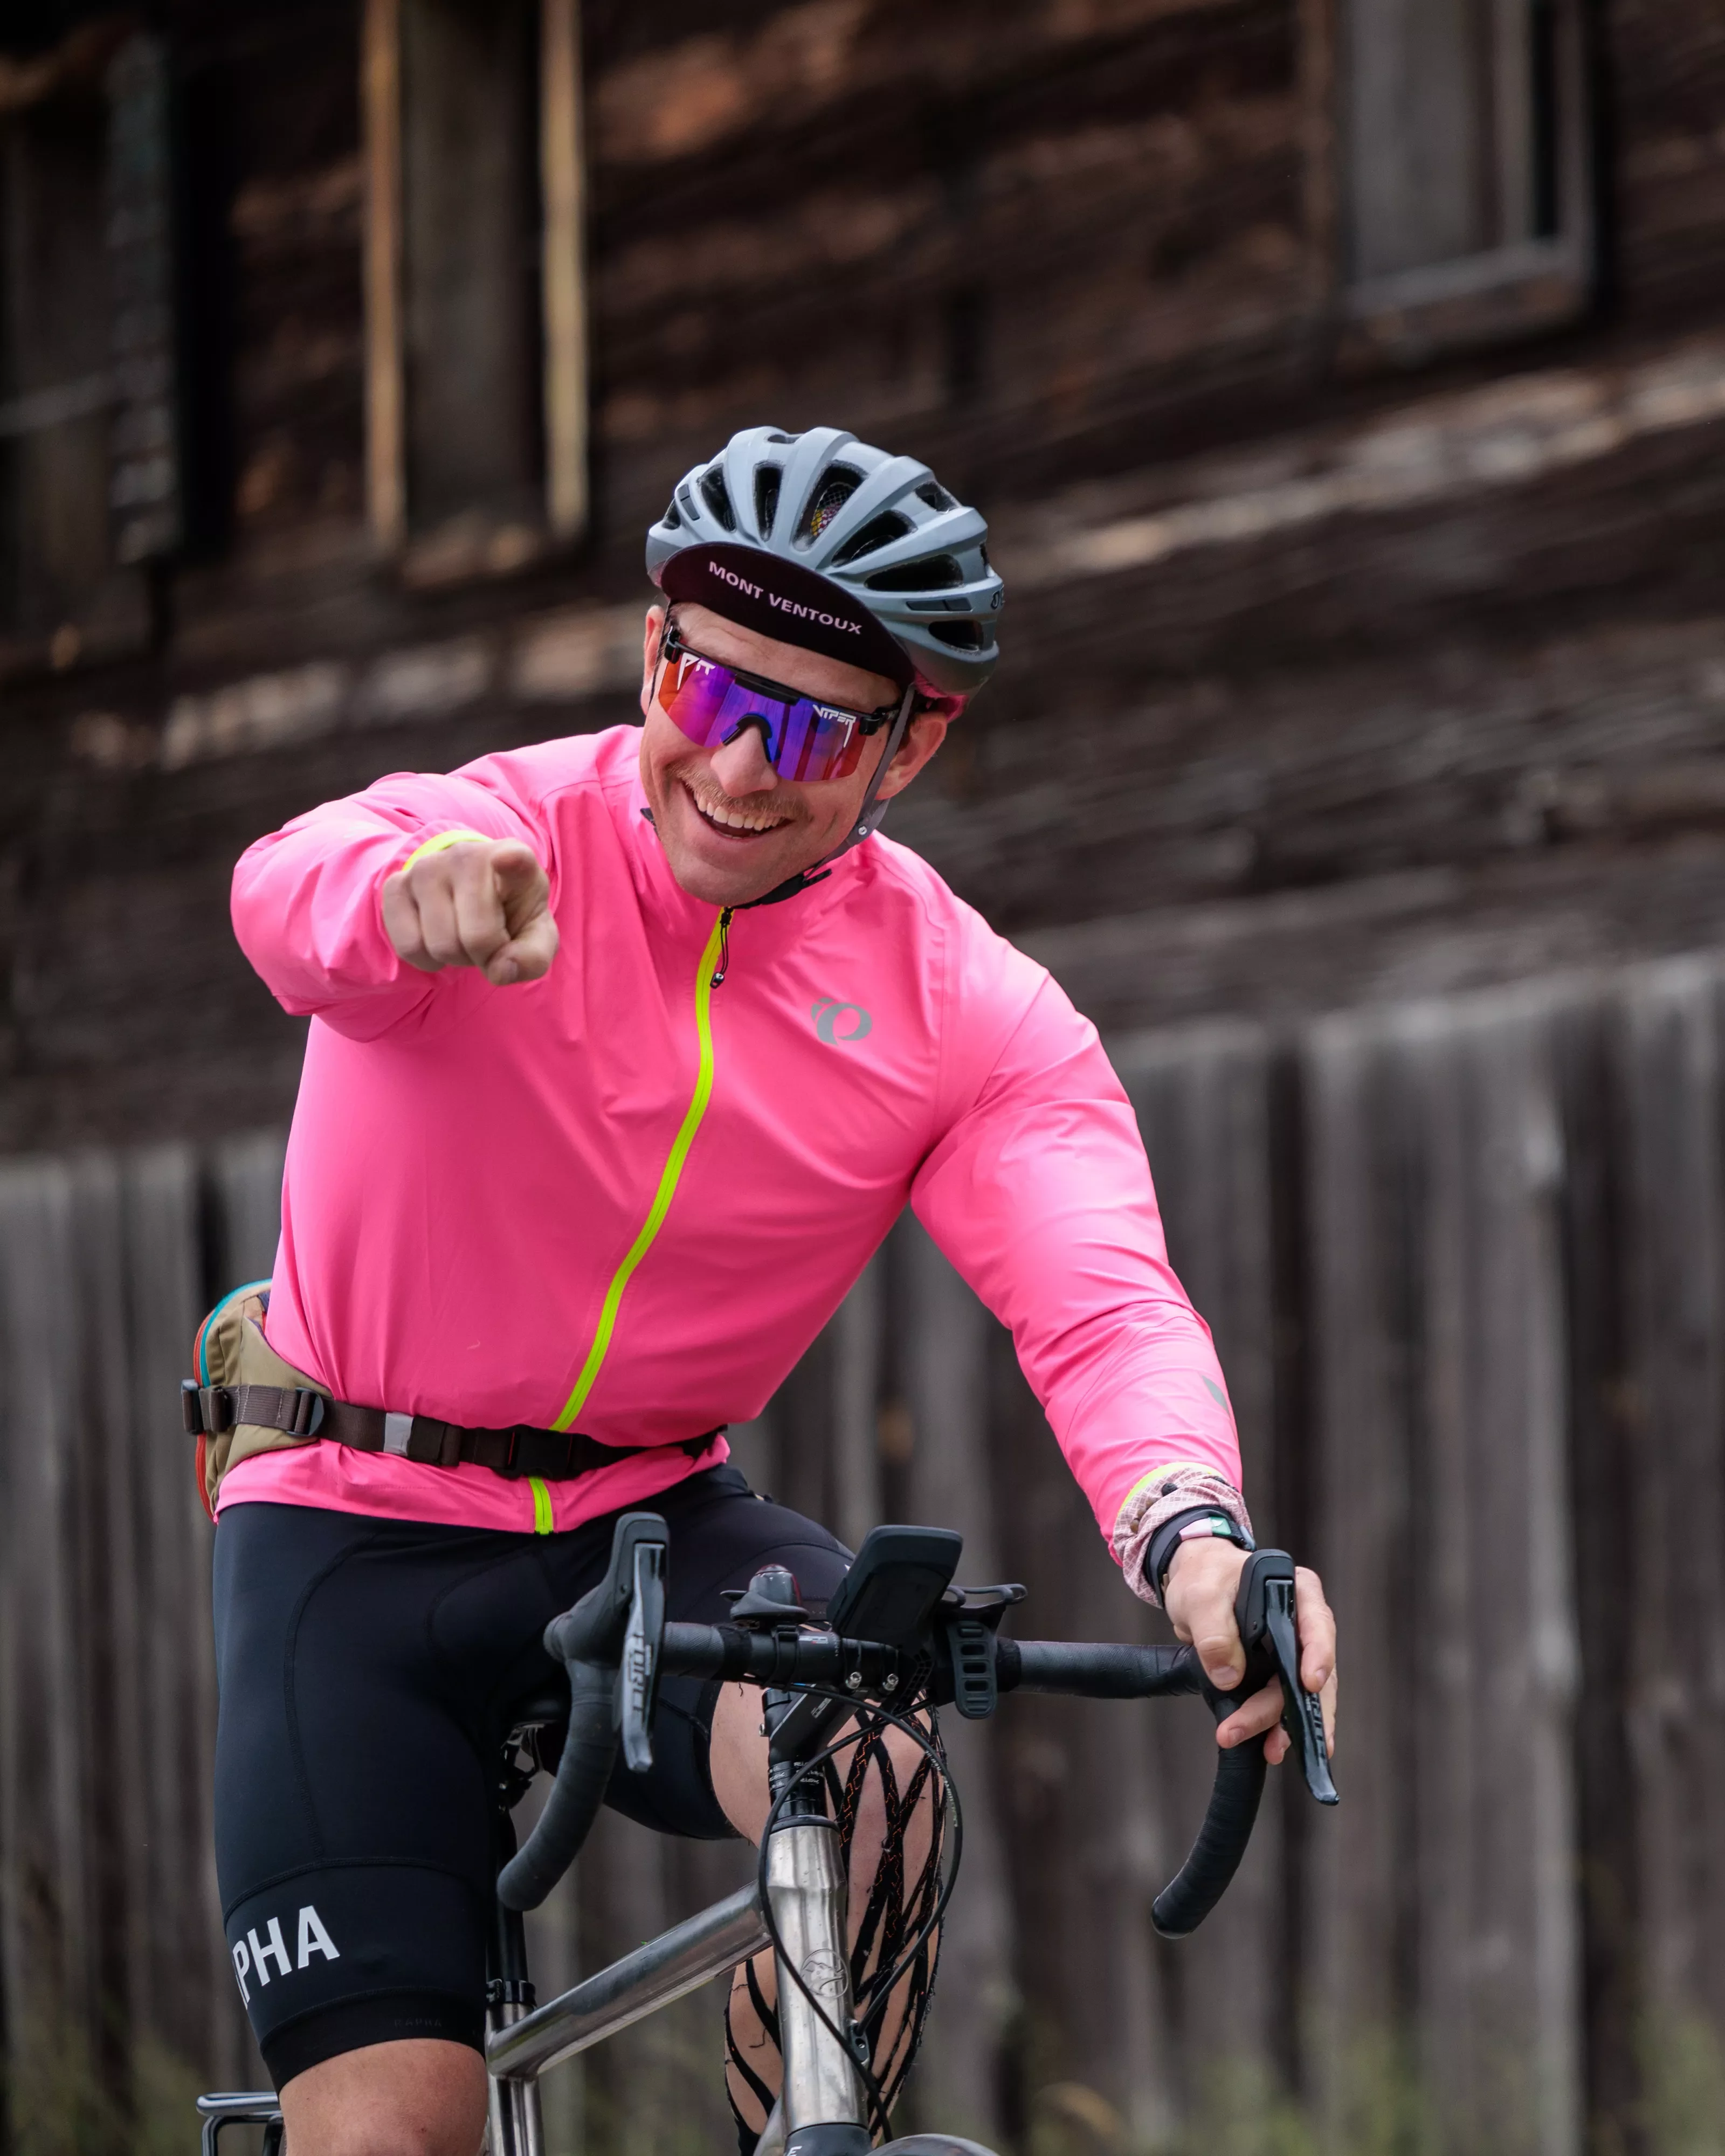 Man with a pink jacket riding a bicycle and pointing at the camera